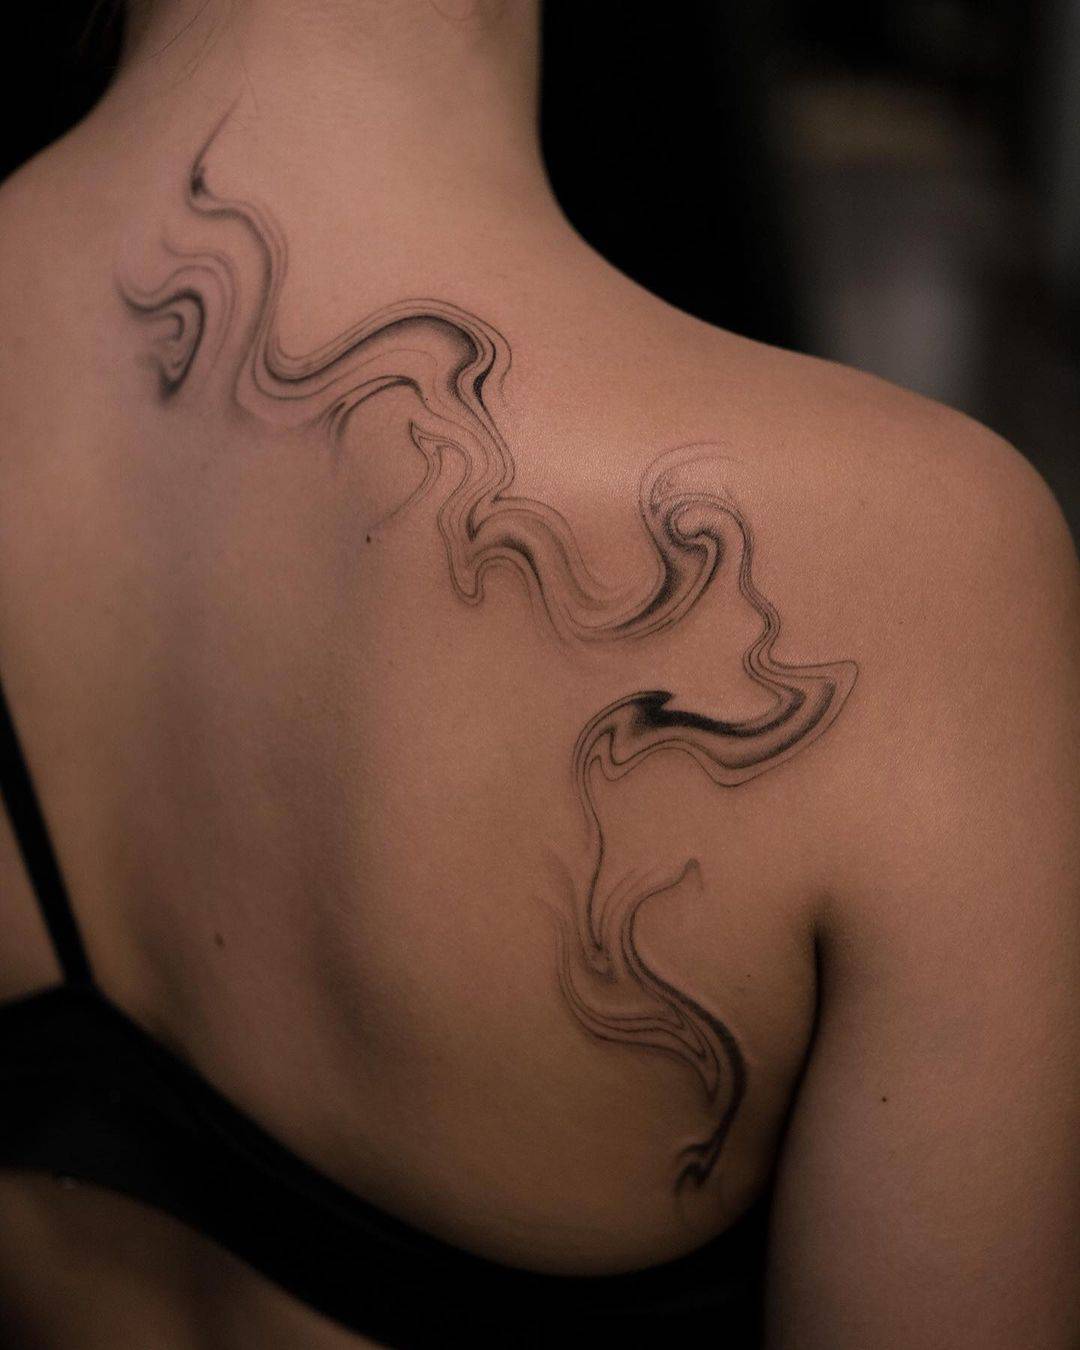 Abstract tattoo design on back by stateofmindink